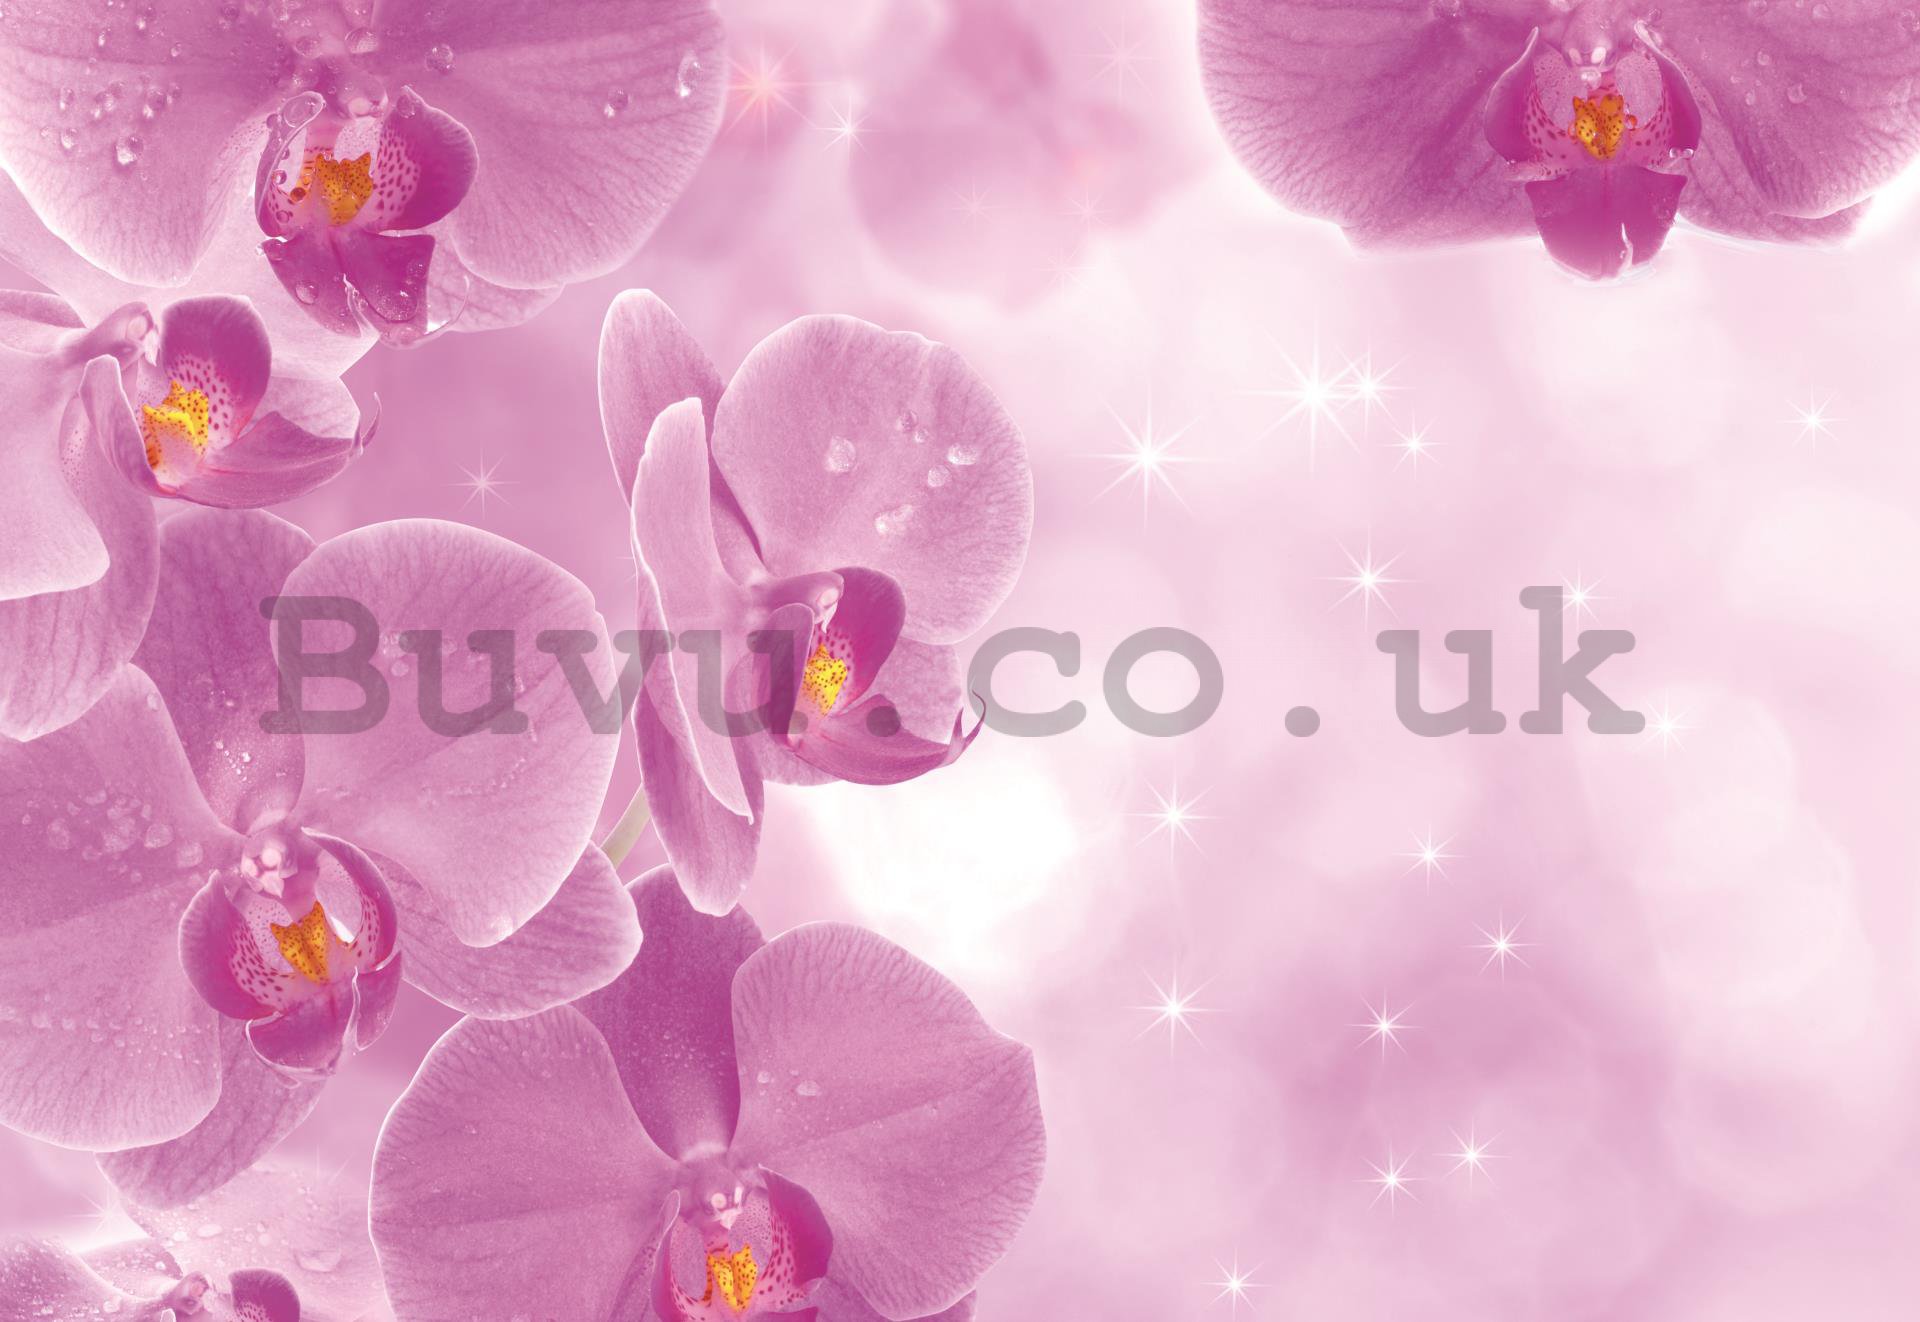 Wall Mural: Orchids (1) - 254x368 cm